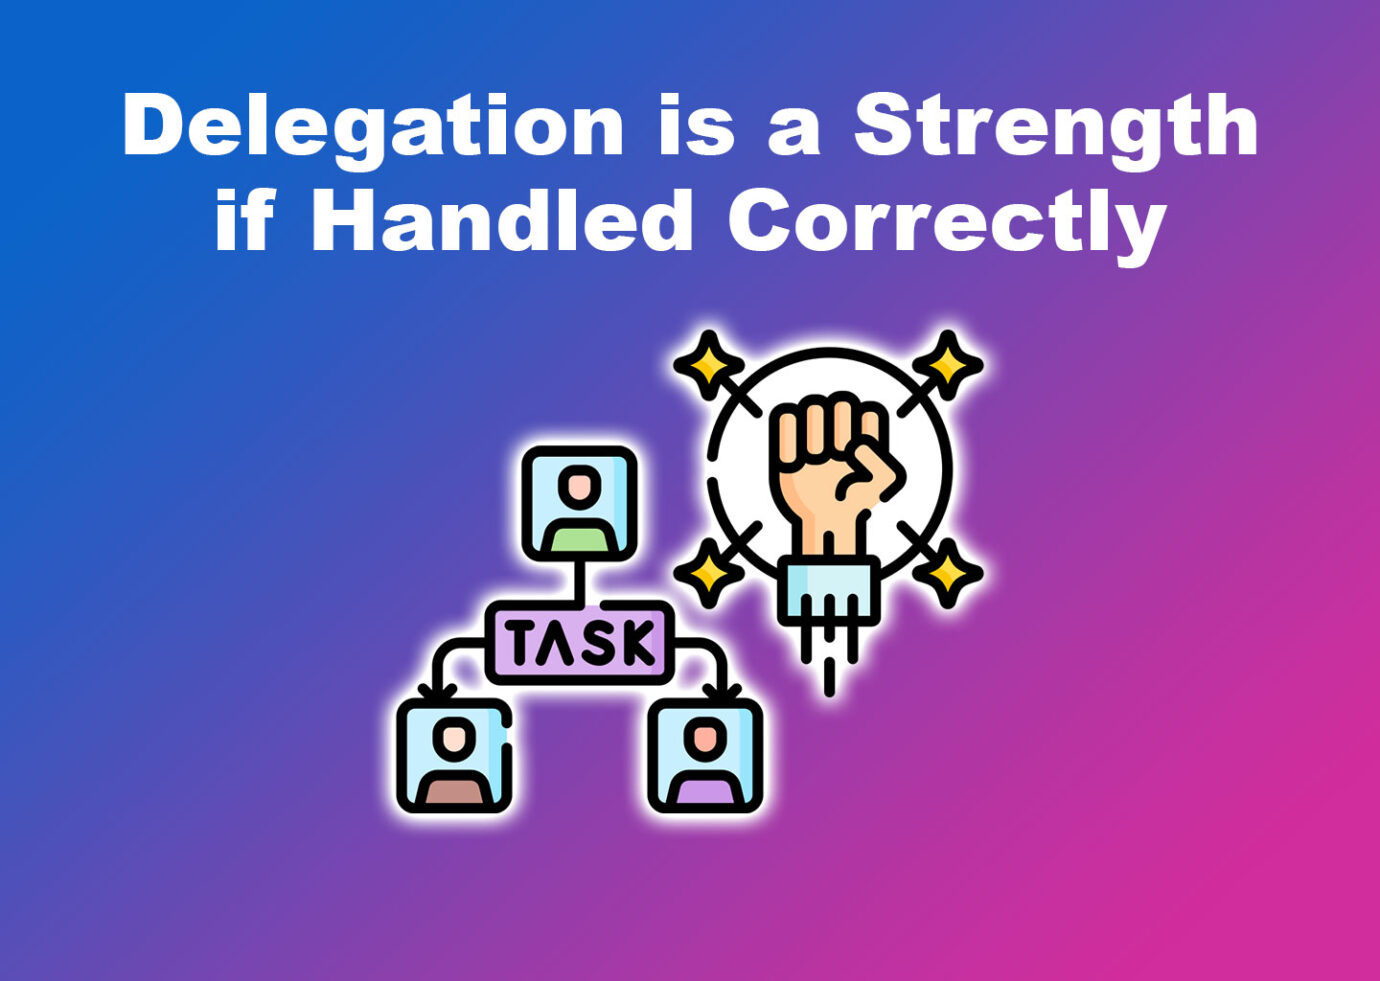 Delegation is a Strength if Handled Correctly